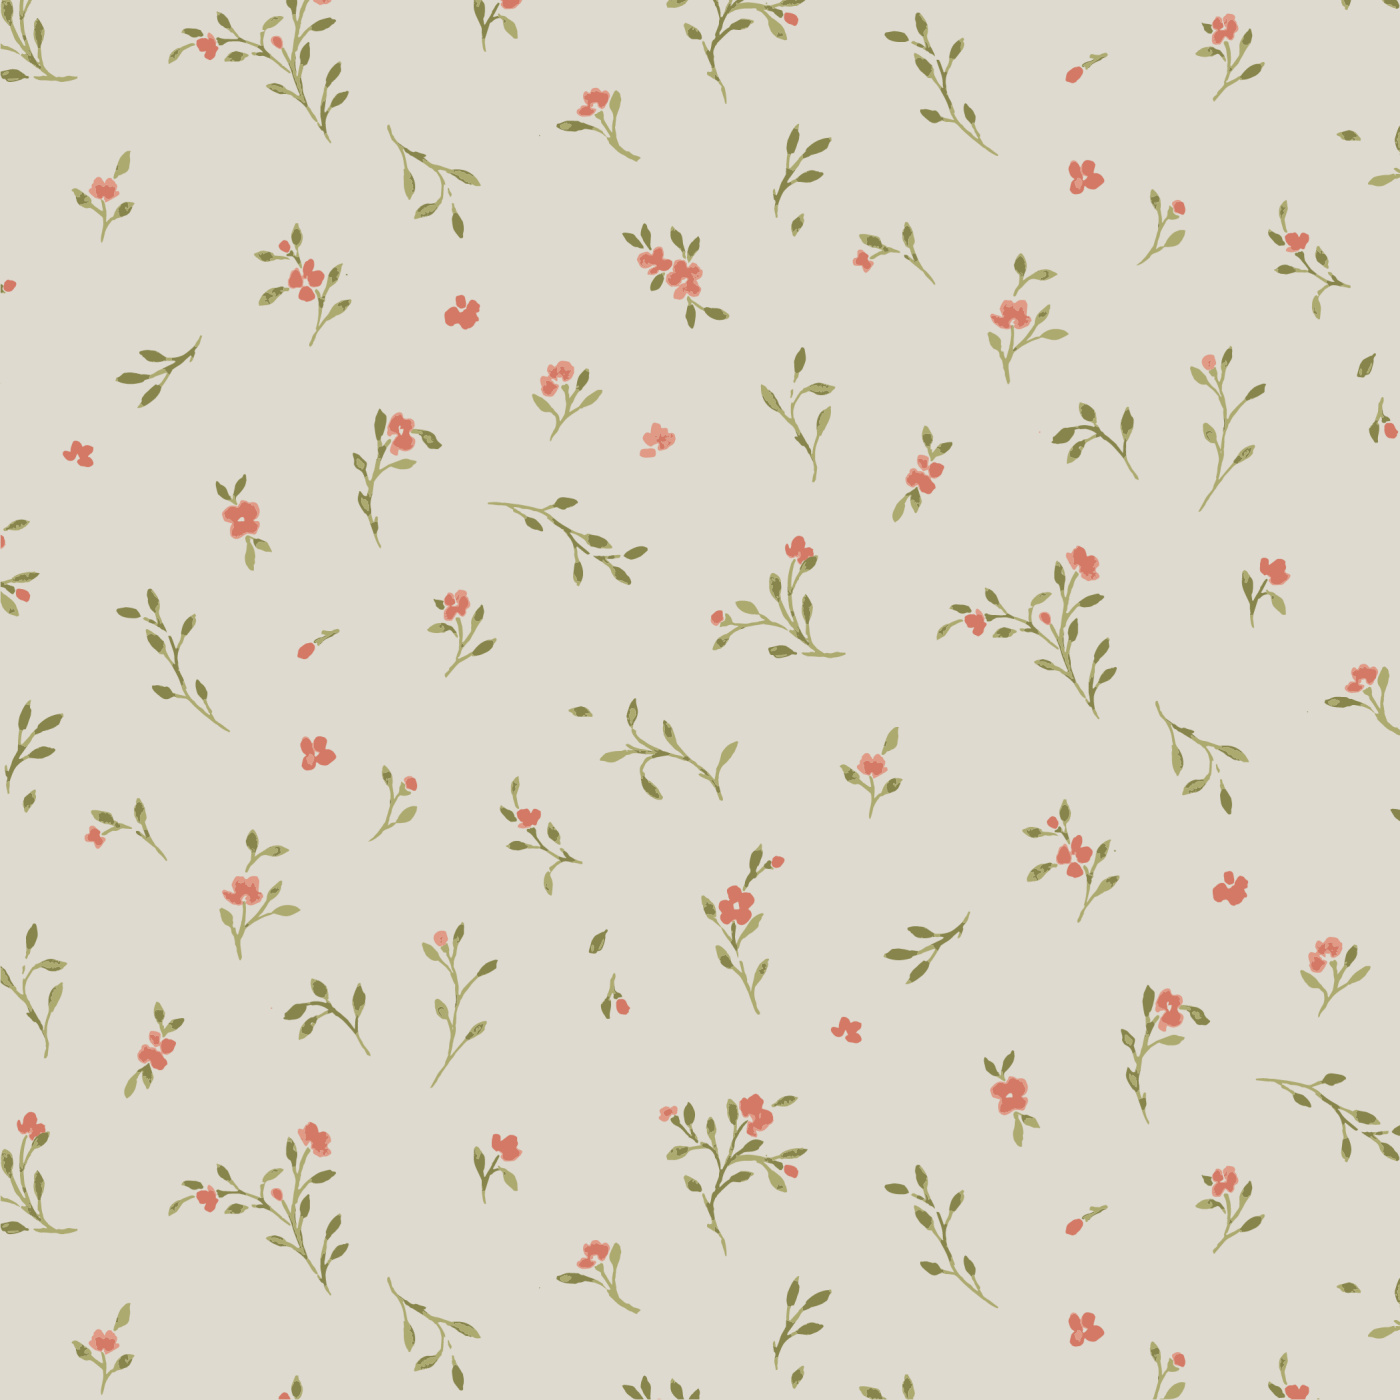 Block Print Daisy Peel and Stick Removable Wallpaper